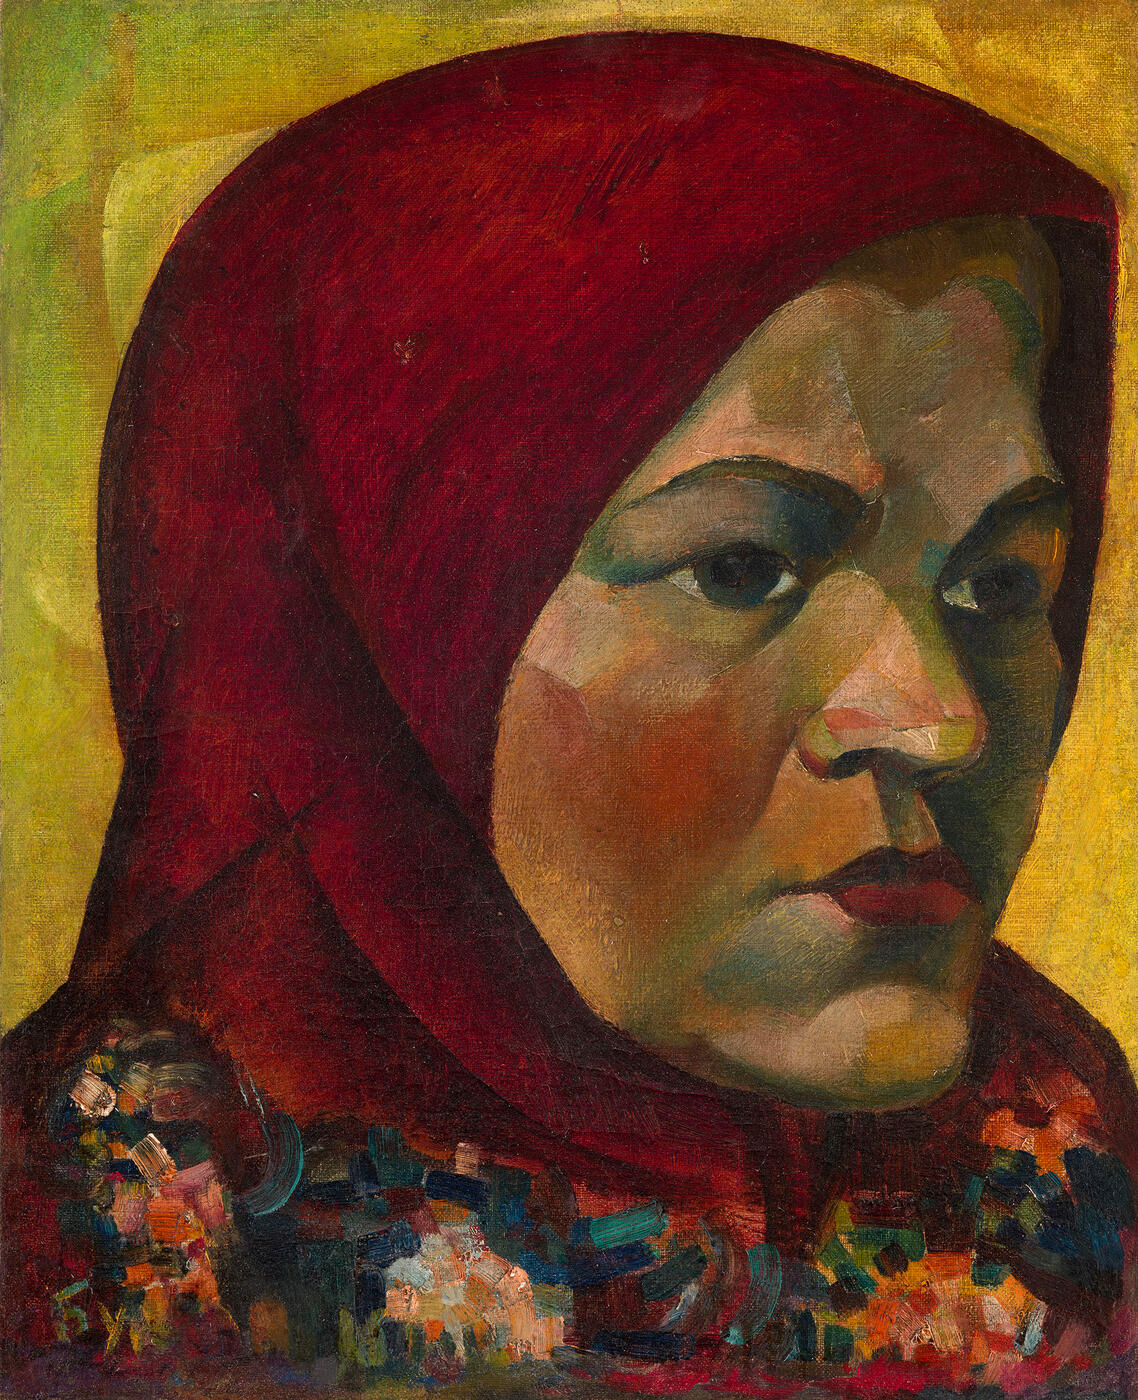 Portrait of a Woman in a Red Headscarf